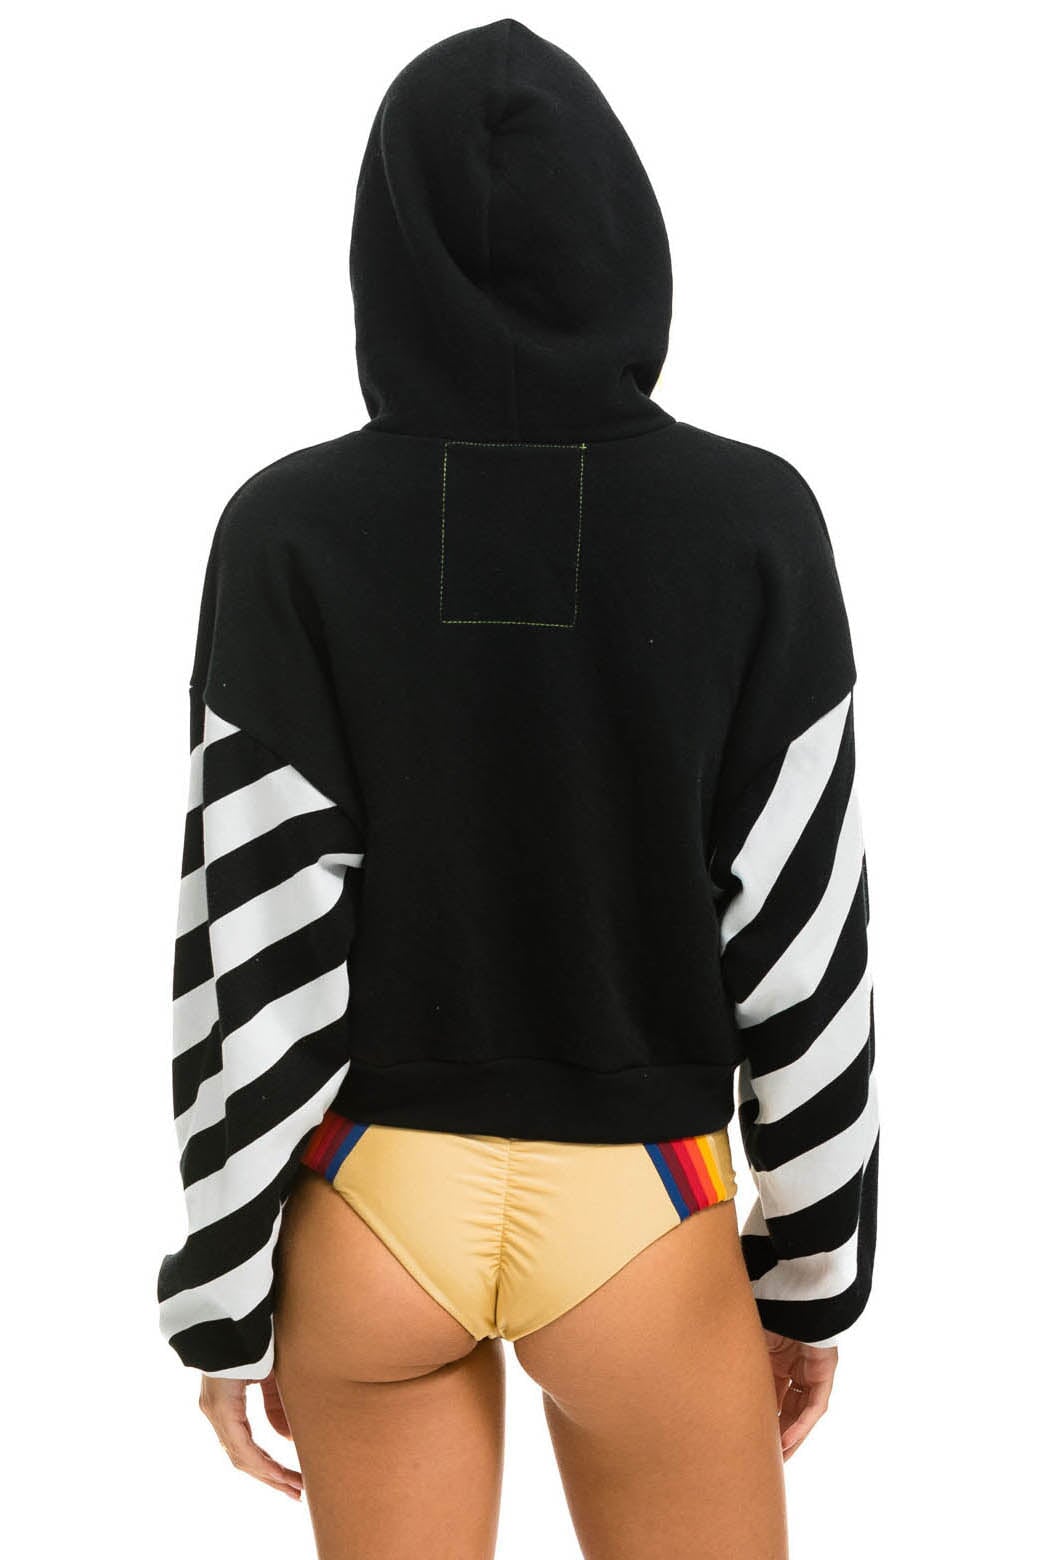 CAUTION STRIPE SLEEVE SMILEY 2 EMBROIDERY RELAXED CROPPED PULLOVER HOODIE - BLACK // WHITE Hoodie Aviator Nation 